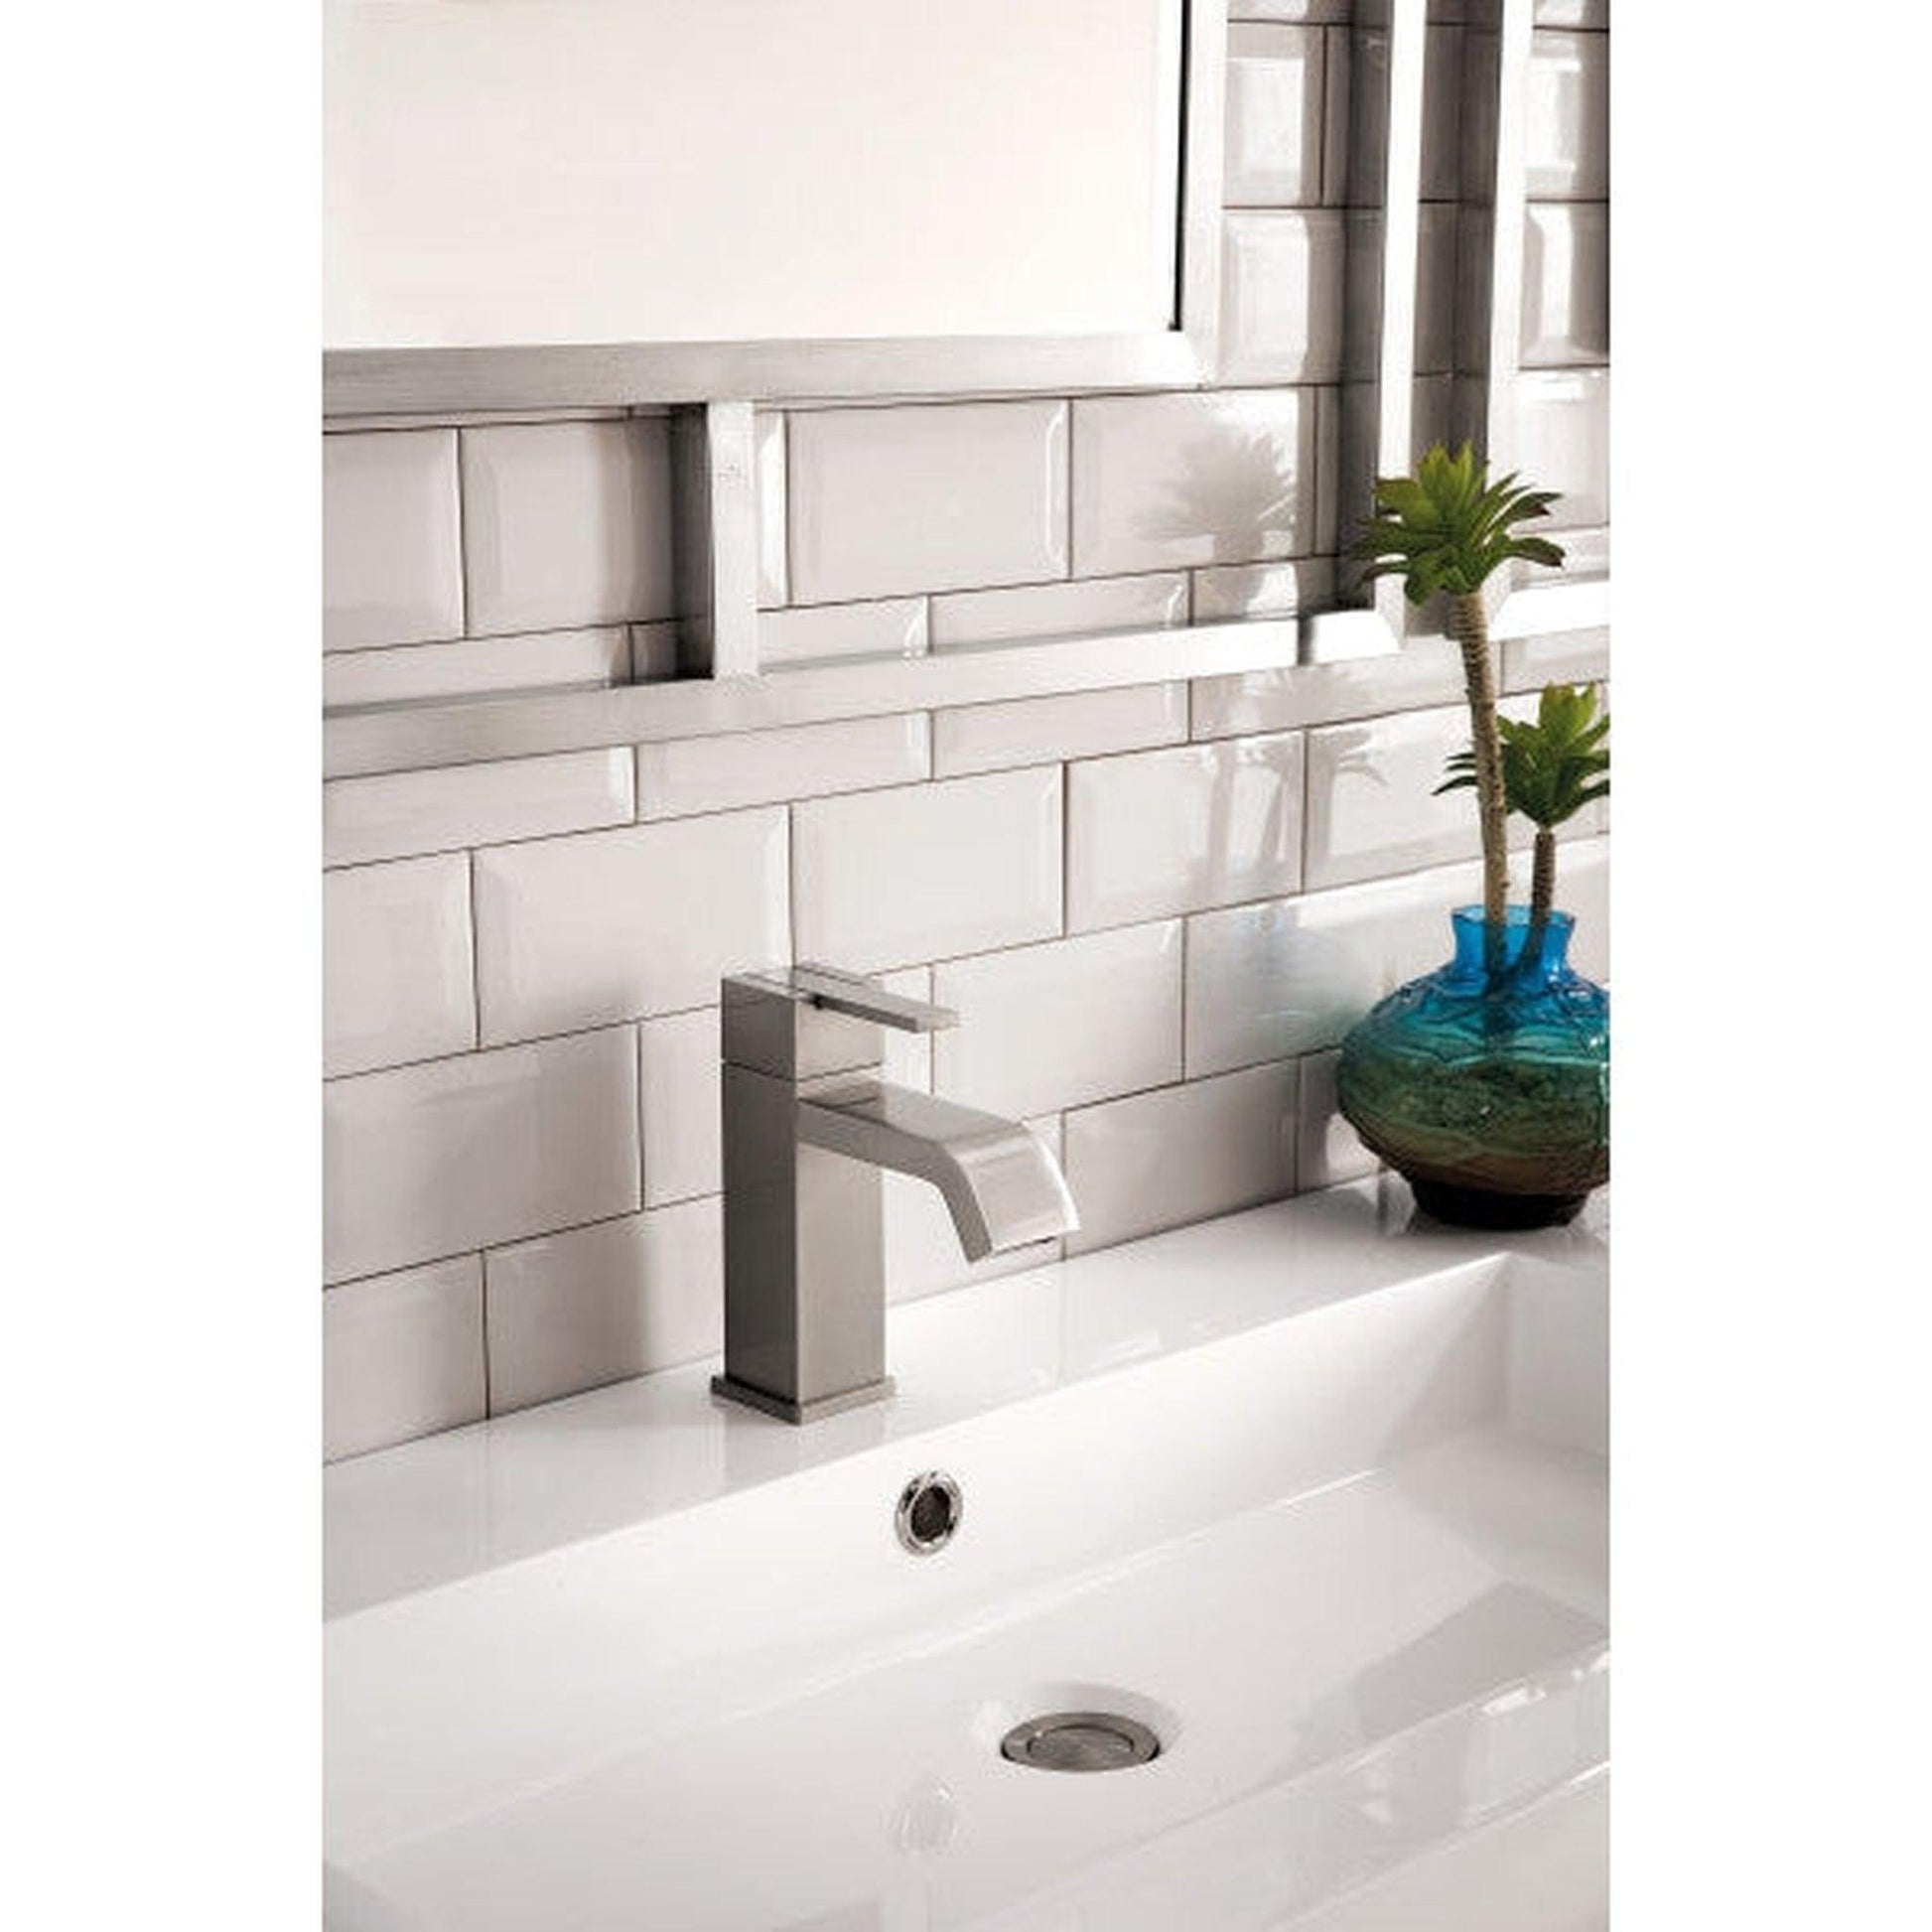 James Martin Boston 63" Double Brushed Nickel Stainless Steel Console Sink With Glossy White Storage Cabinet and White Glossy Composite Countertop